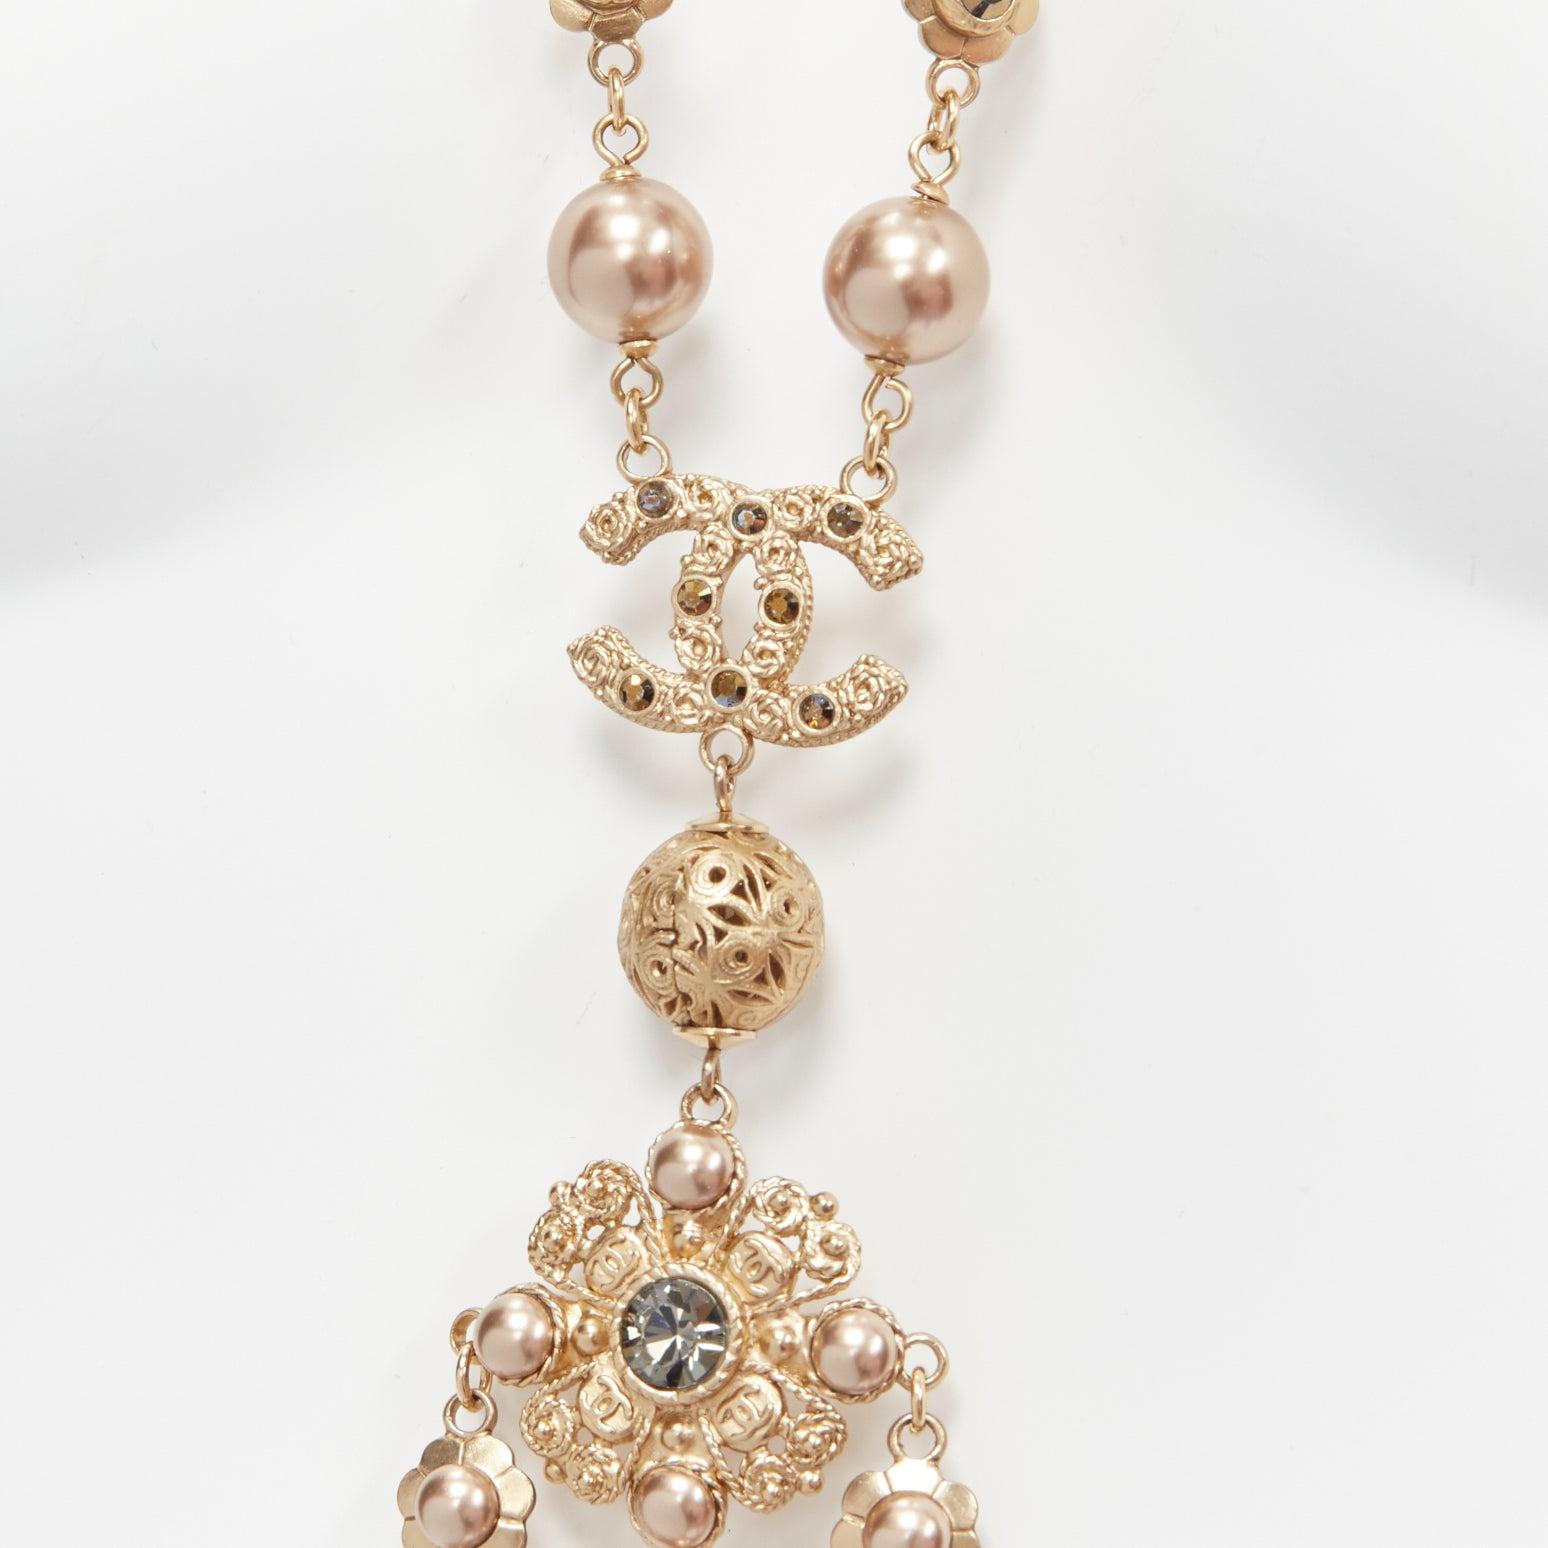 CHANEL Karl Lagerfeld 06A gold CC pearl floral pendant long necklace
Reference: TGAS/D00541
Brand: Chanel
Designer: Karl Lagerfeld
Collection: 06A - Runway
Material: Metal
Color: Gold, Pearl
Pattern: Solid
Closure: Lobster Clasp
Lining: Gold